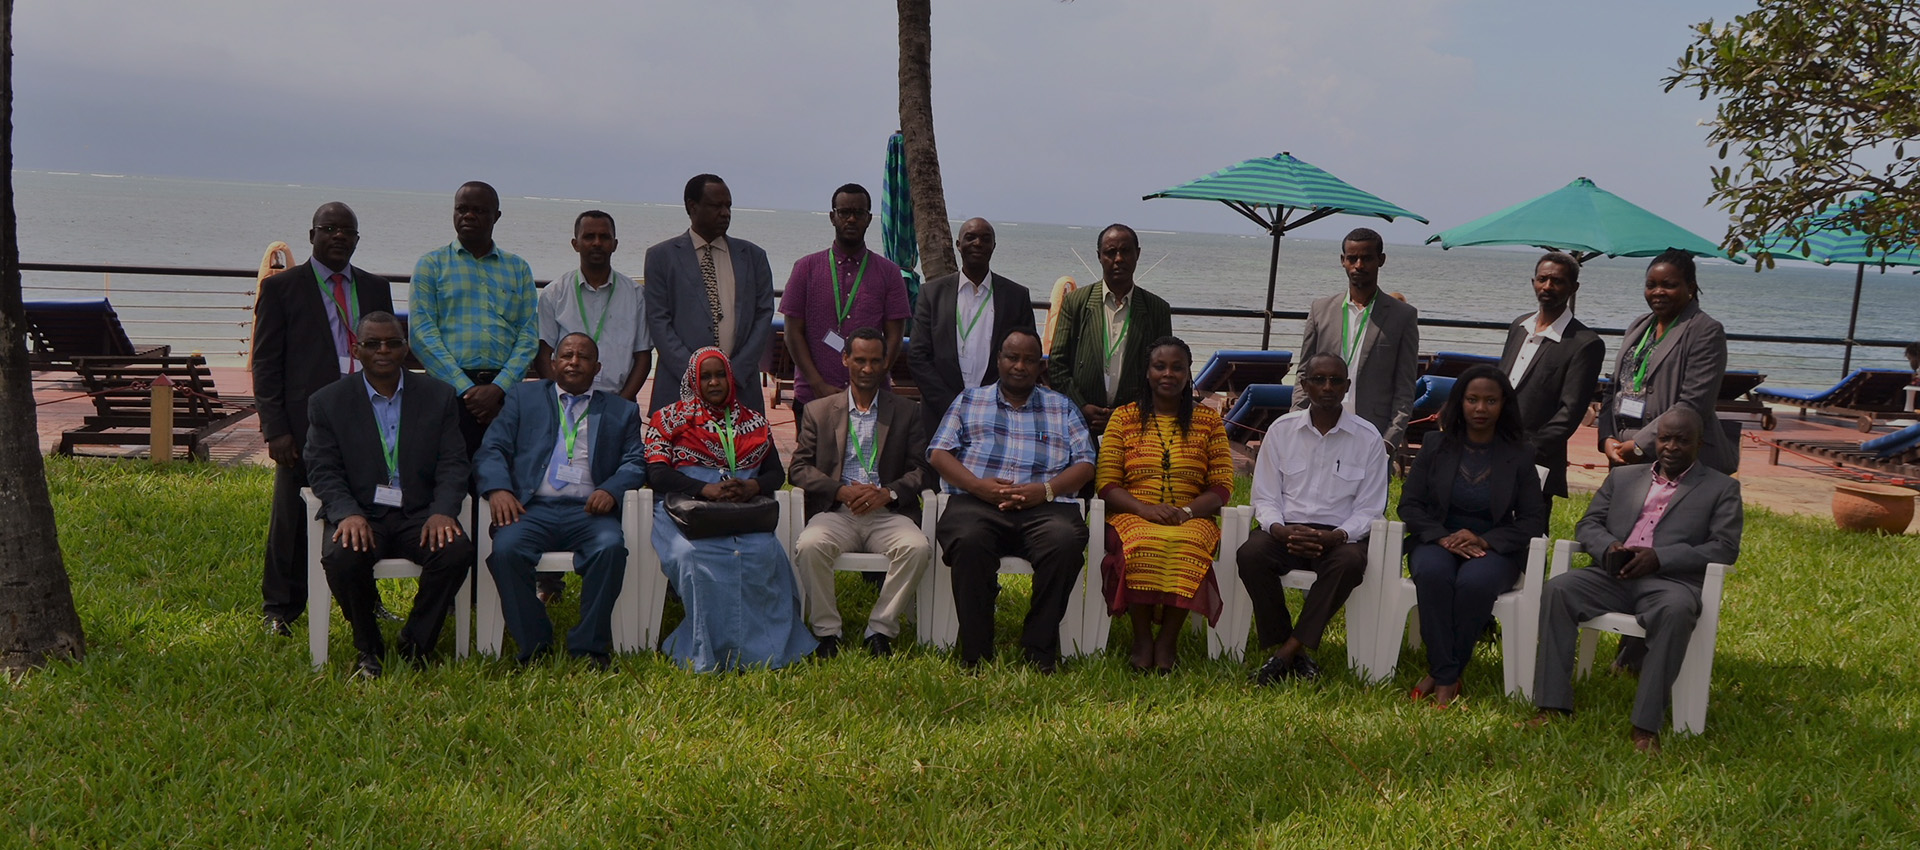 The IGAD Land Governance Project